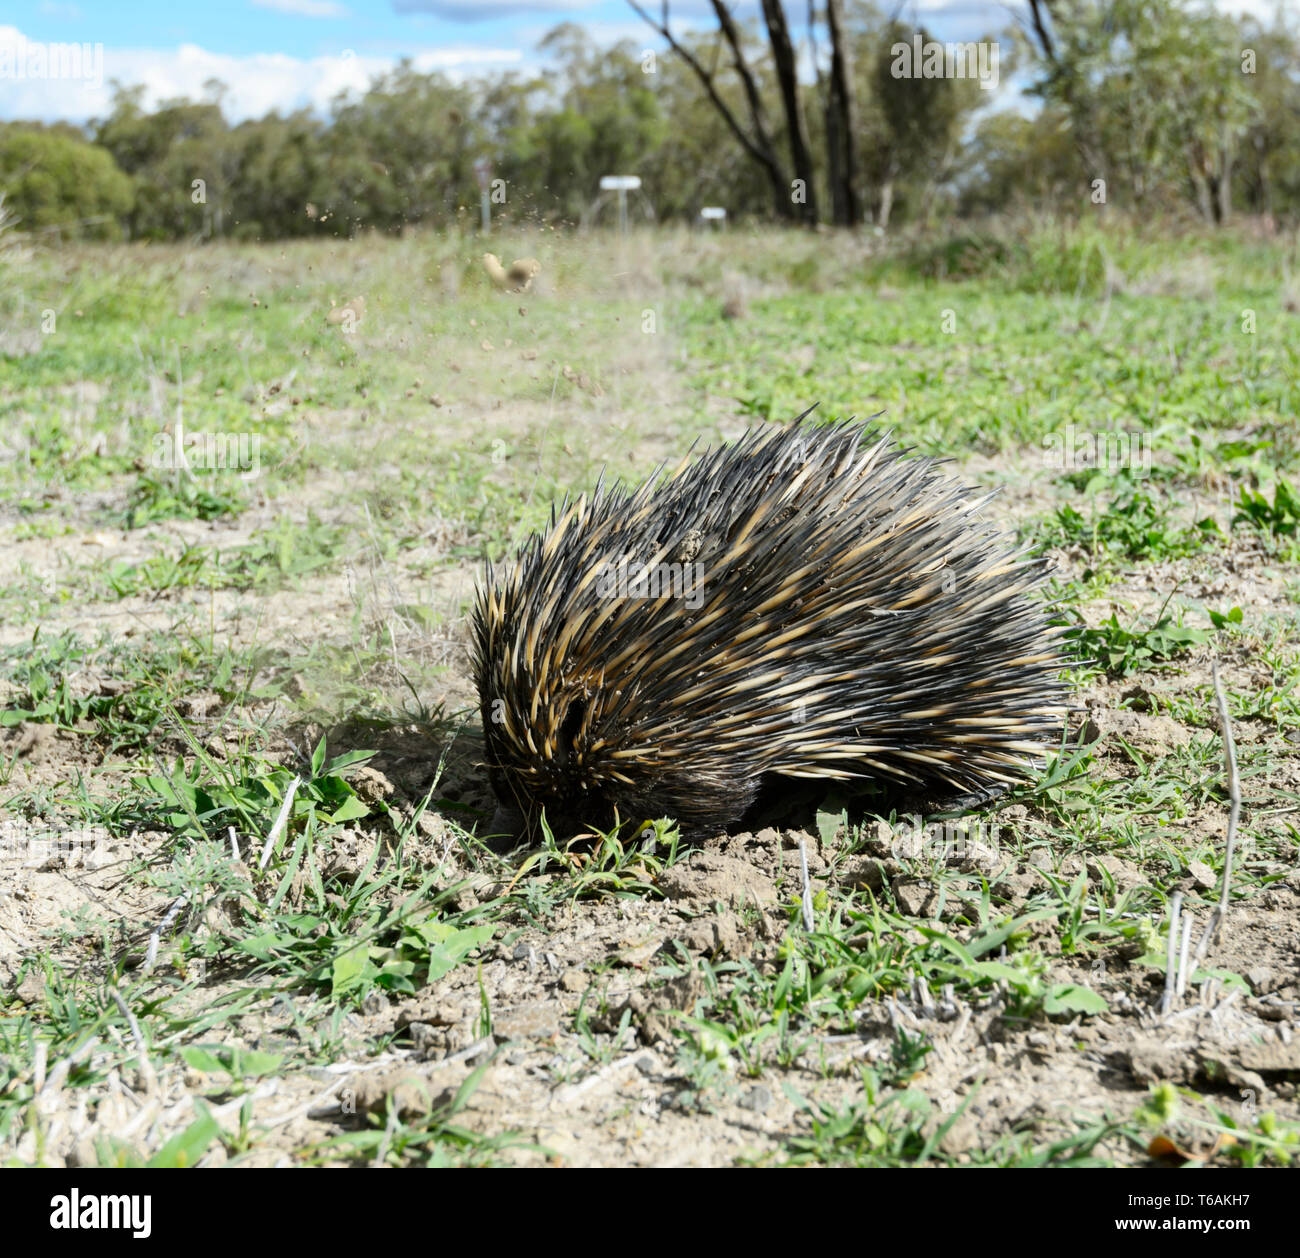 Short-nosed Echidna or Short-beaked Echidna (Tachyglossus aculeatus) digging out an ant nest, near Injune in the Queensland interior, QLD, Australia Stock Photo